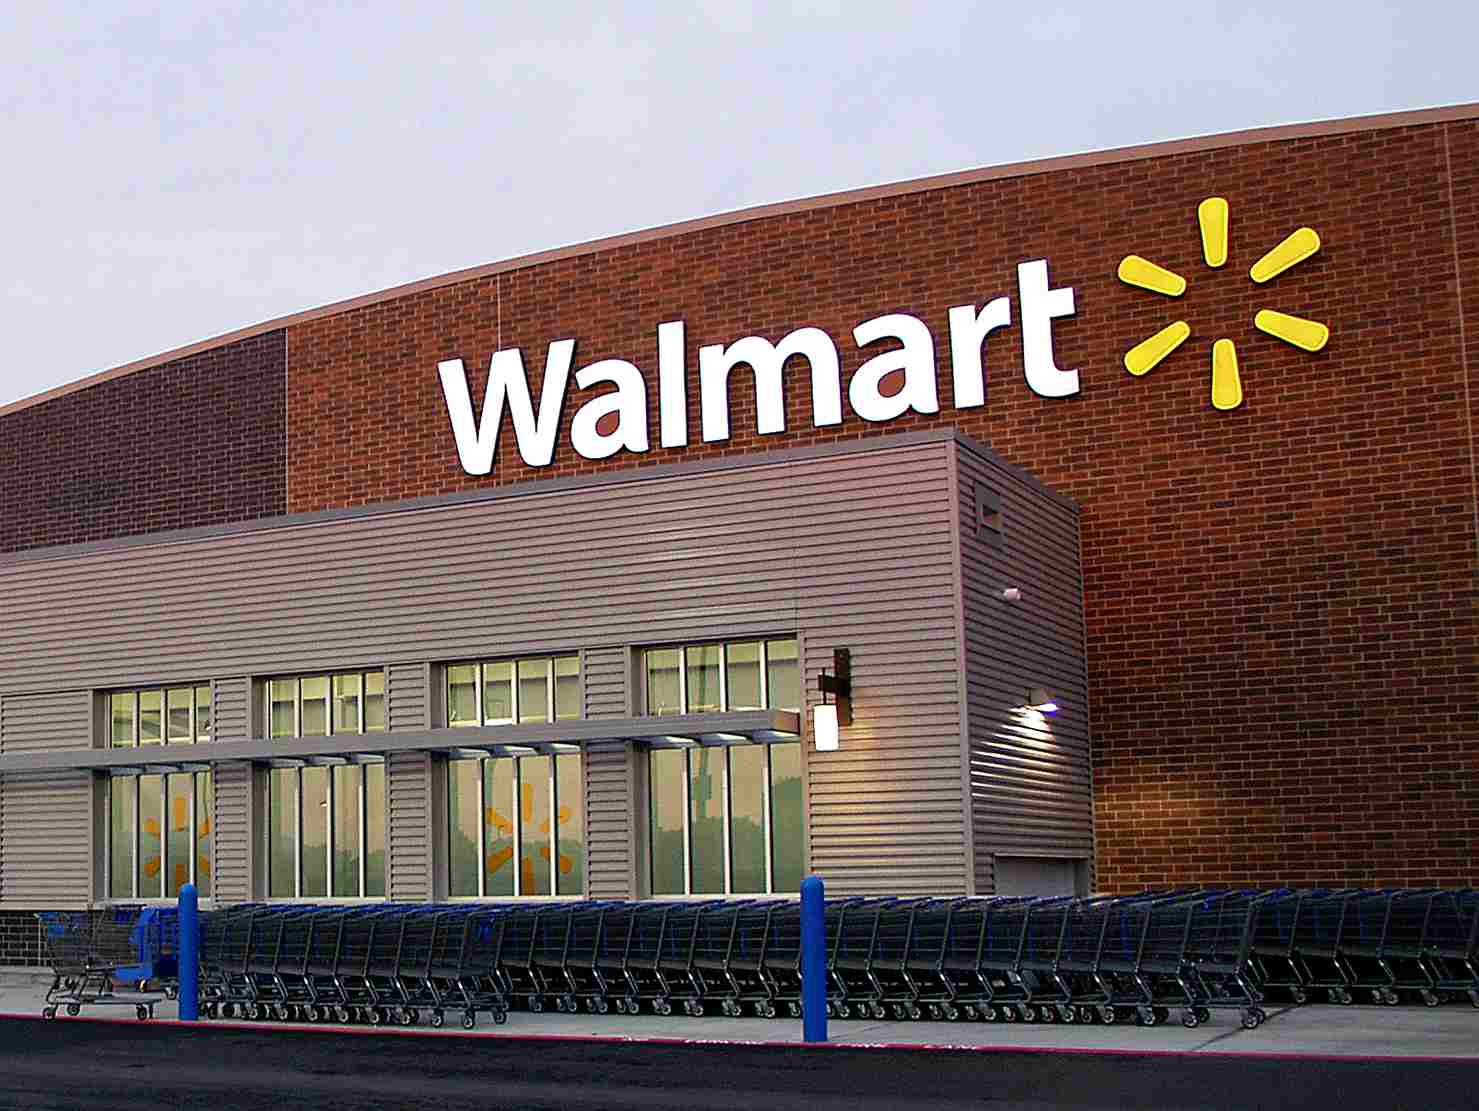 What benefits could Tesla get from Walmart?